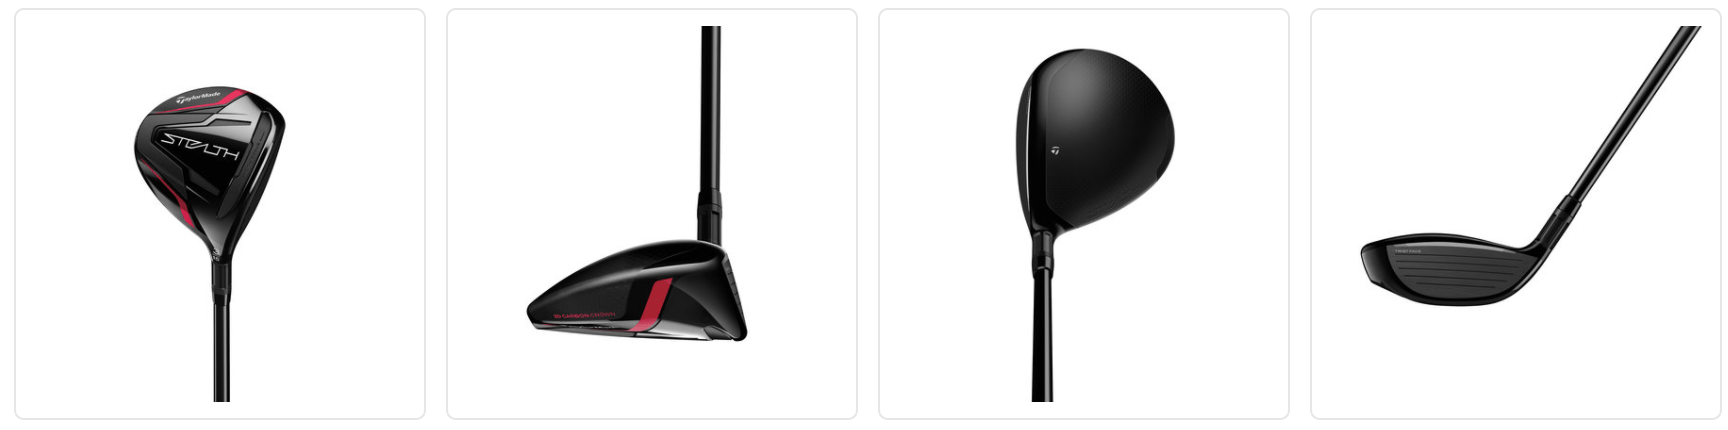 TaylorMade Golf Company Introduces the Stealth Family of Fairways and ...